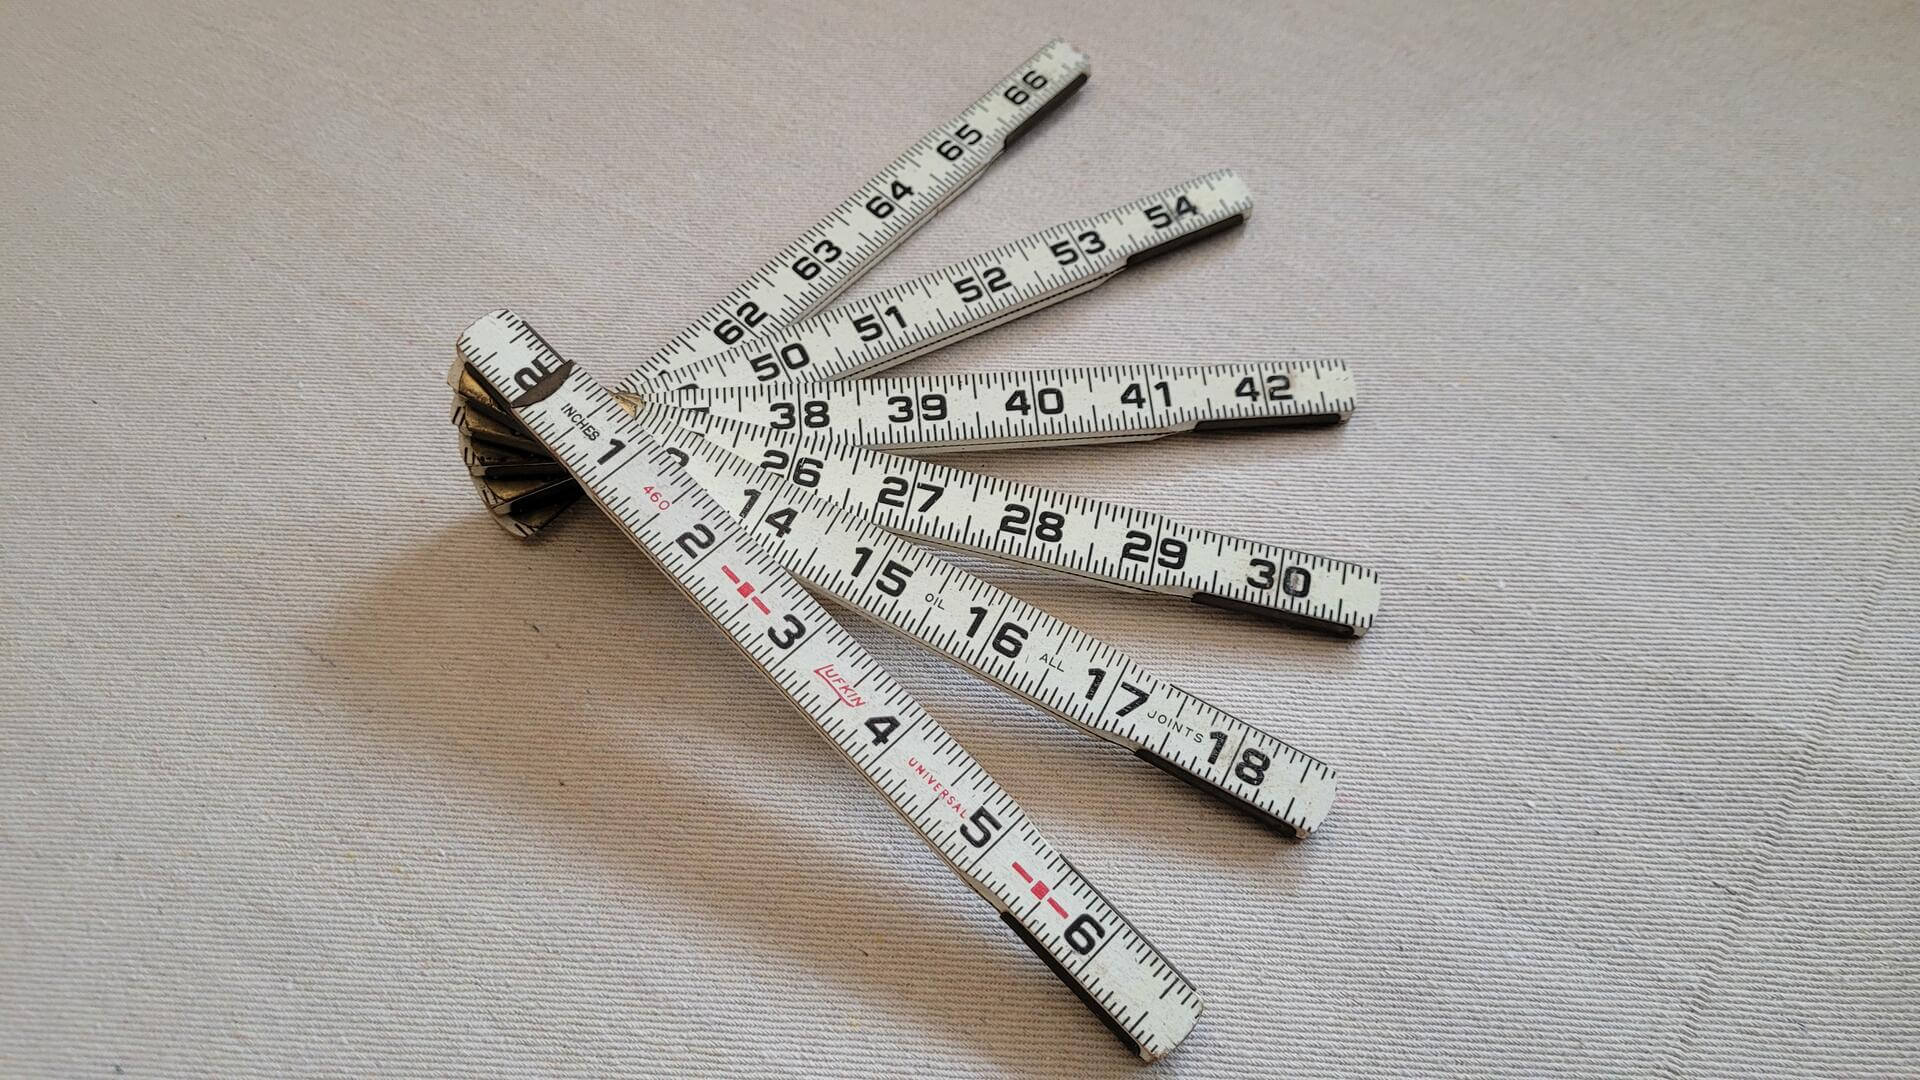 lufkin-universal-460-folding-wood-brass-carpenter-ruler-vintage-made-in-usa-collectible-woodworking-rule-measuring-tools